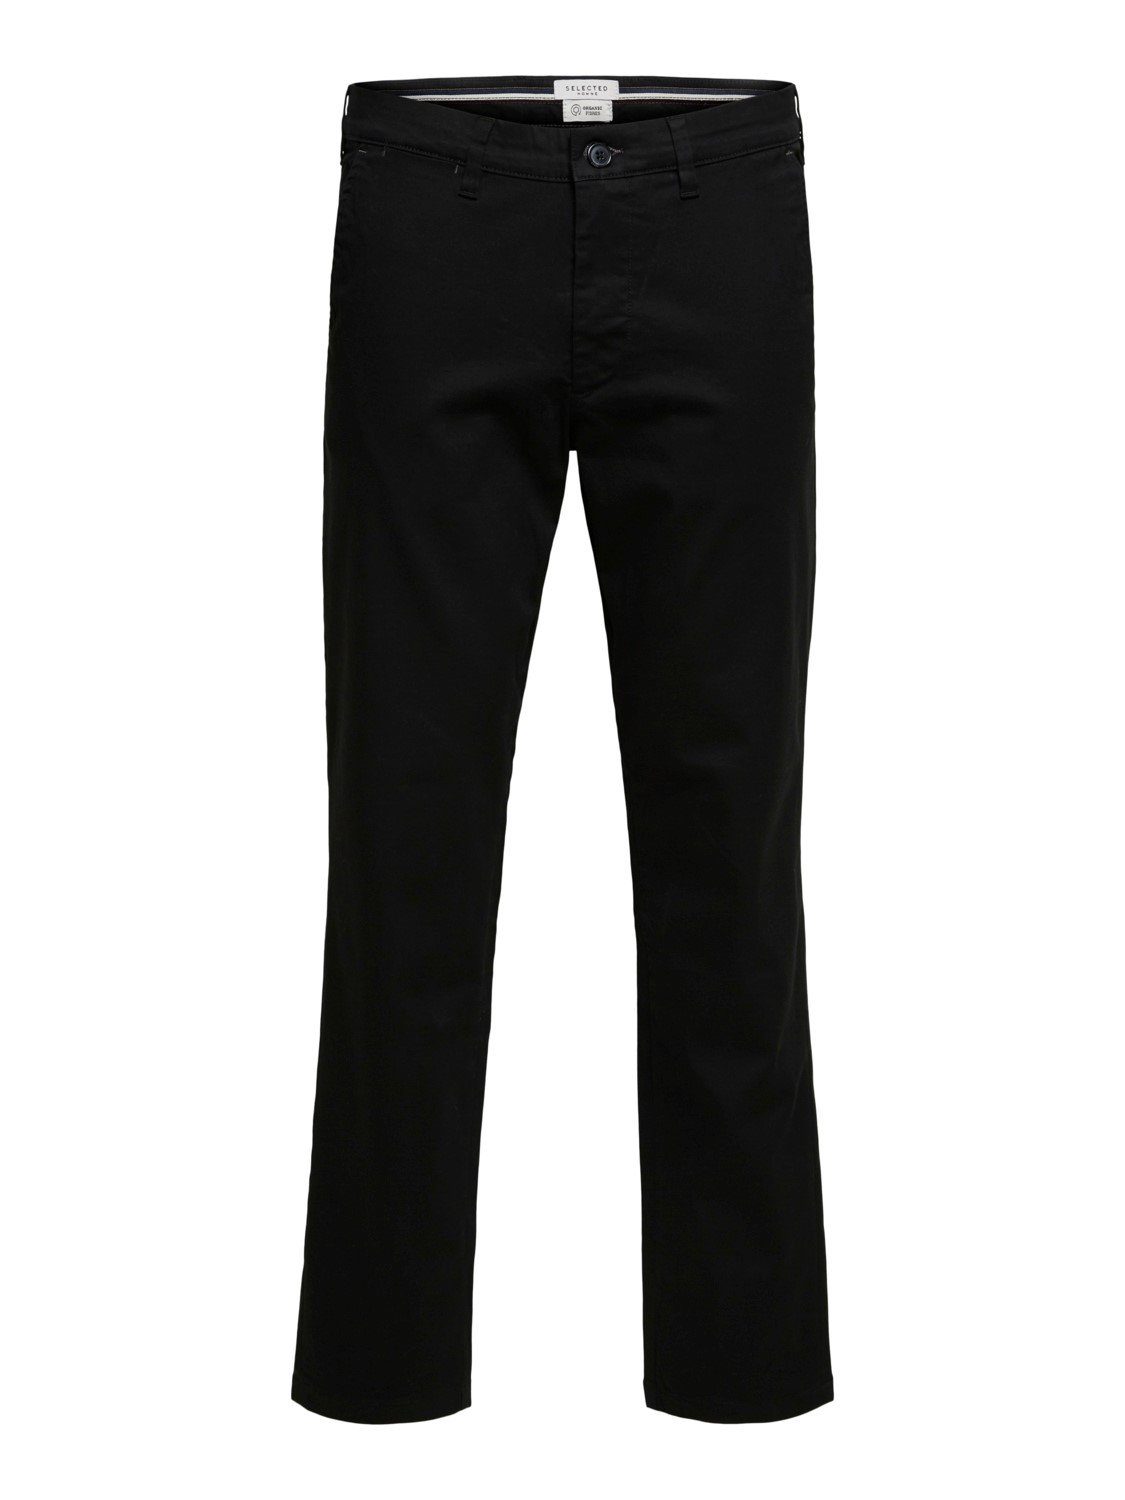 Stretch Black (16074054) MILES mit SELECTED Chinohose HOMME FLEX